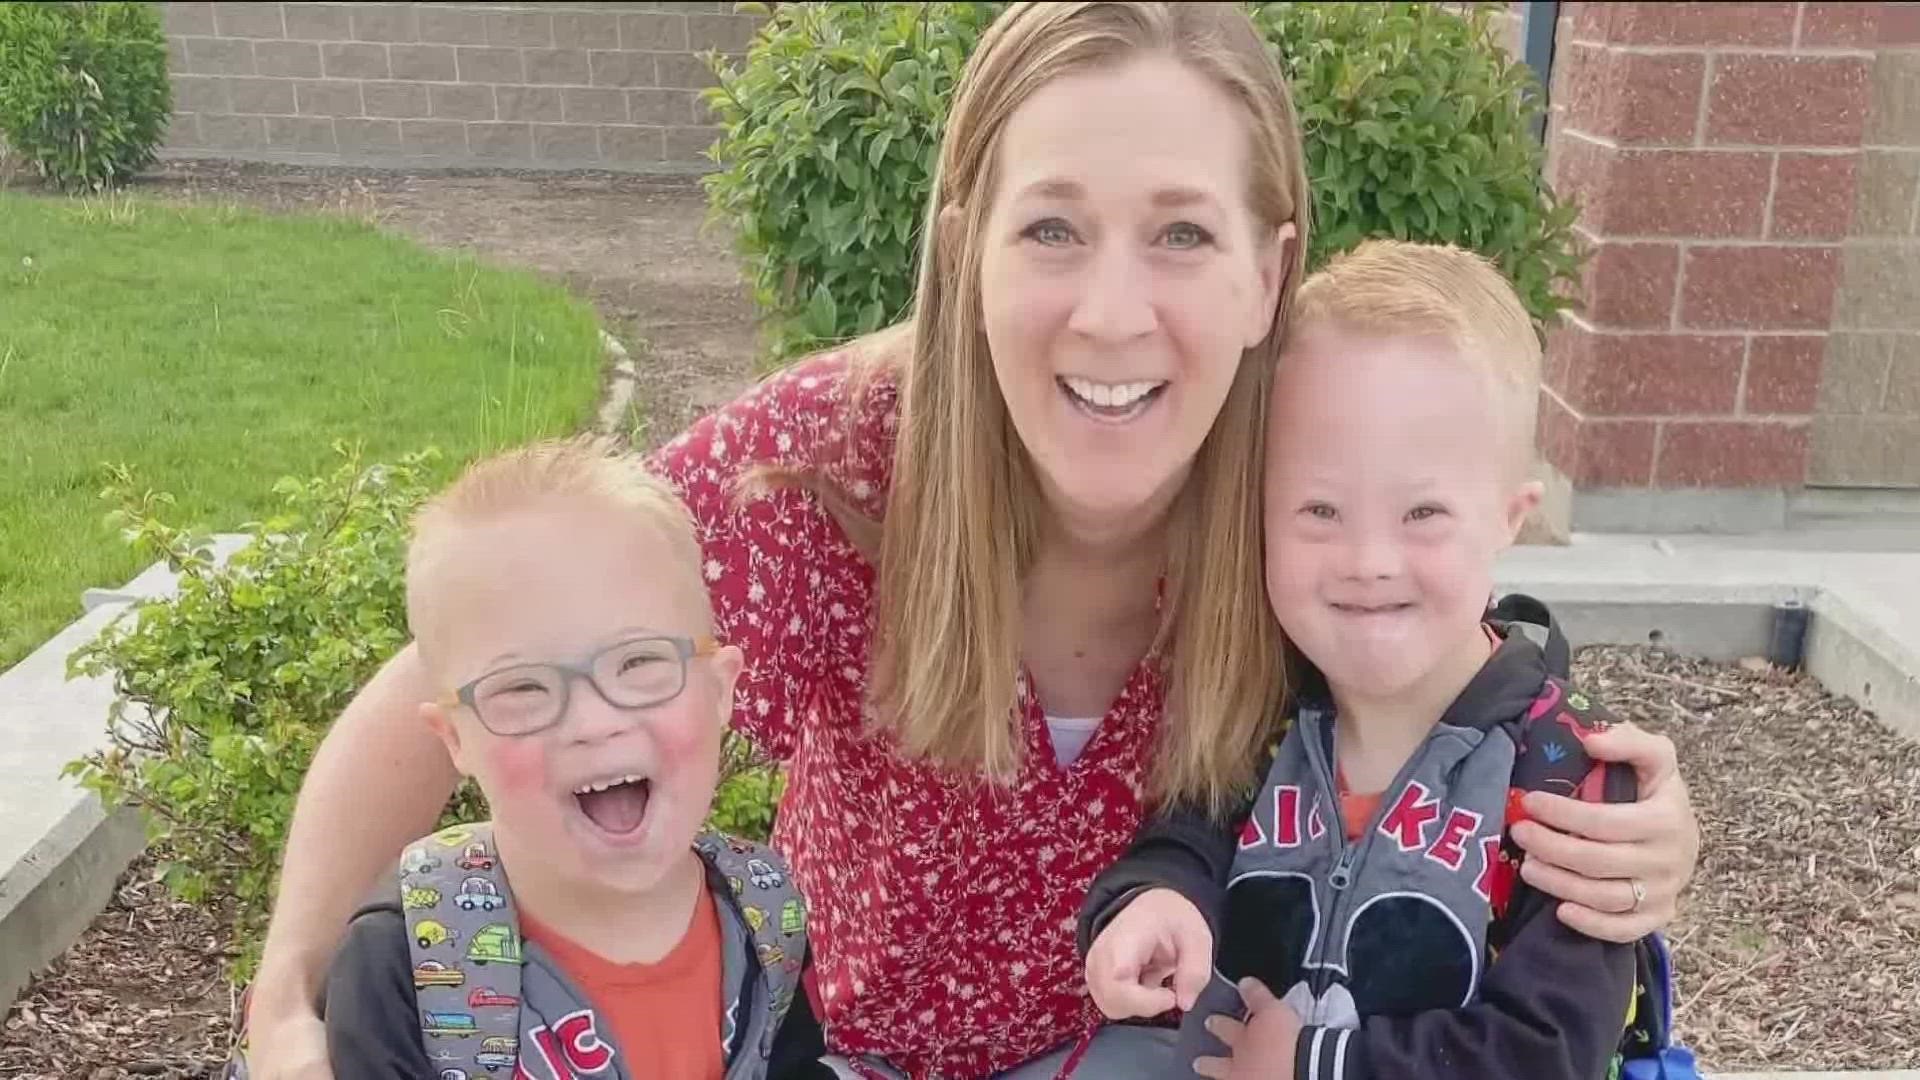 Charlie and Milo McConnel are starring in a new national campaign for Scentsy. Their mom says seeing people of all abilities in advertising is a win for all of us.